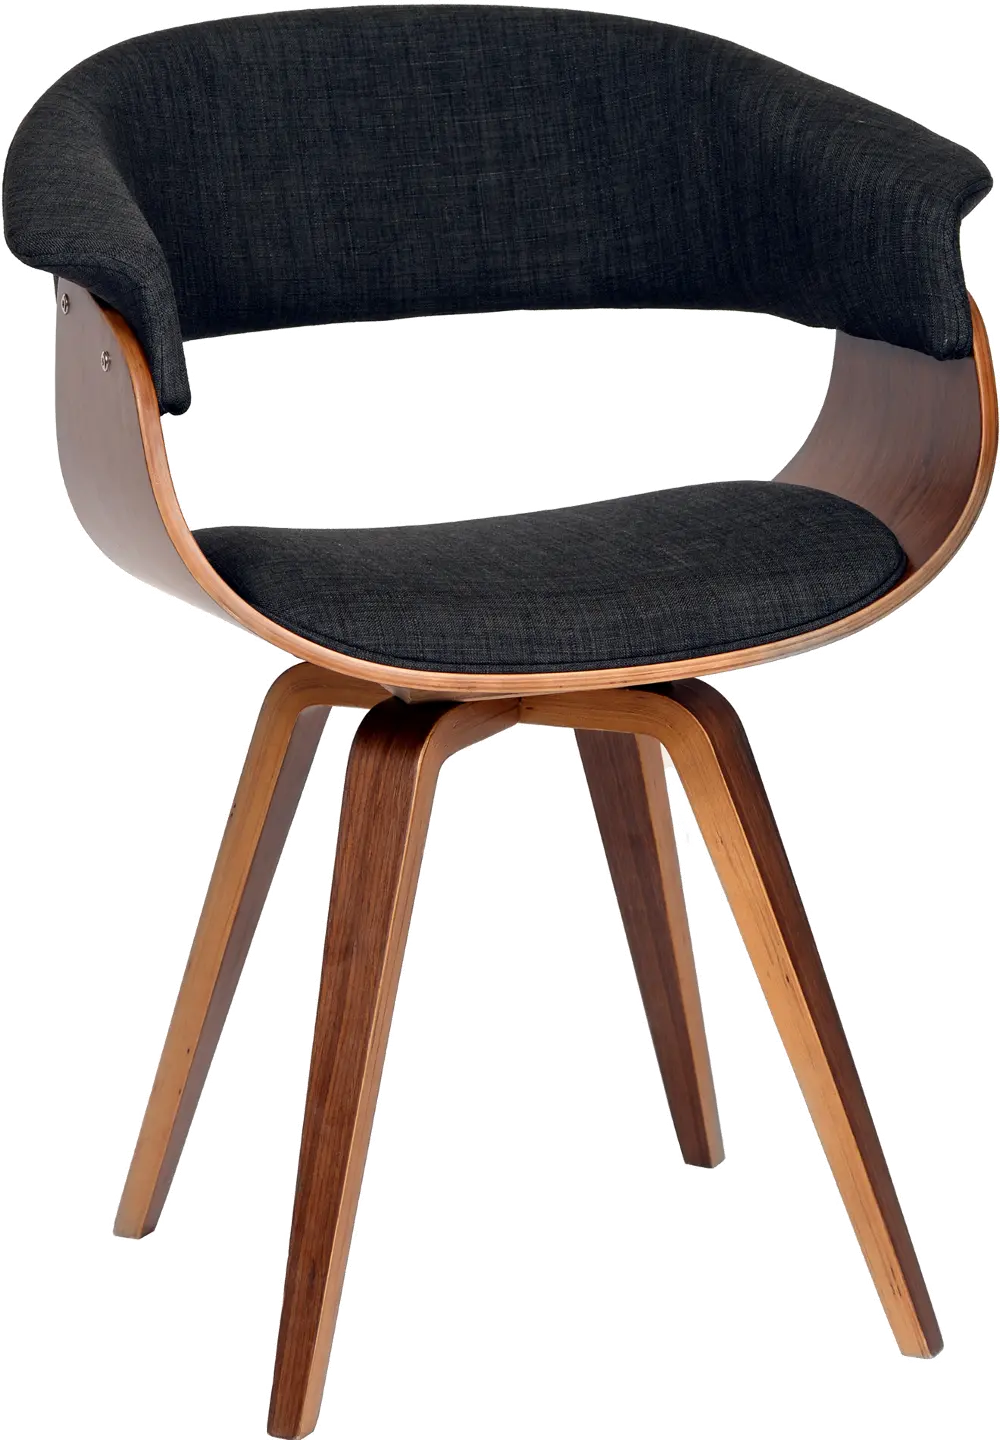 LCSUCHWACH Summer Charcoal and Walnut Dining Room Chair-1